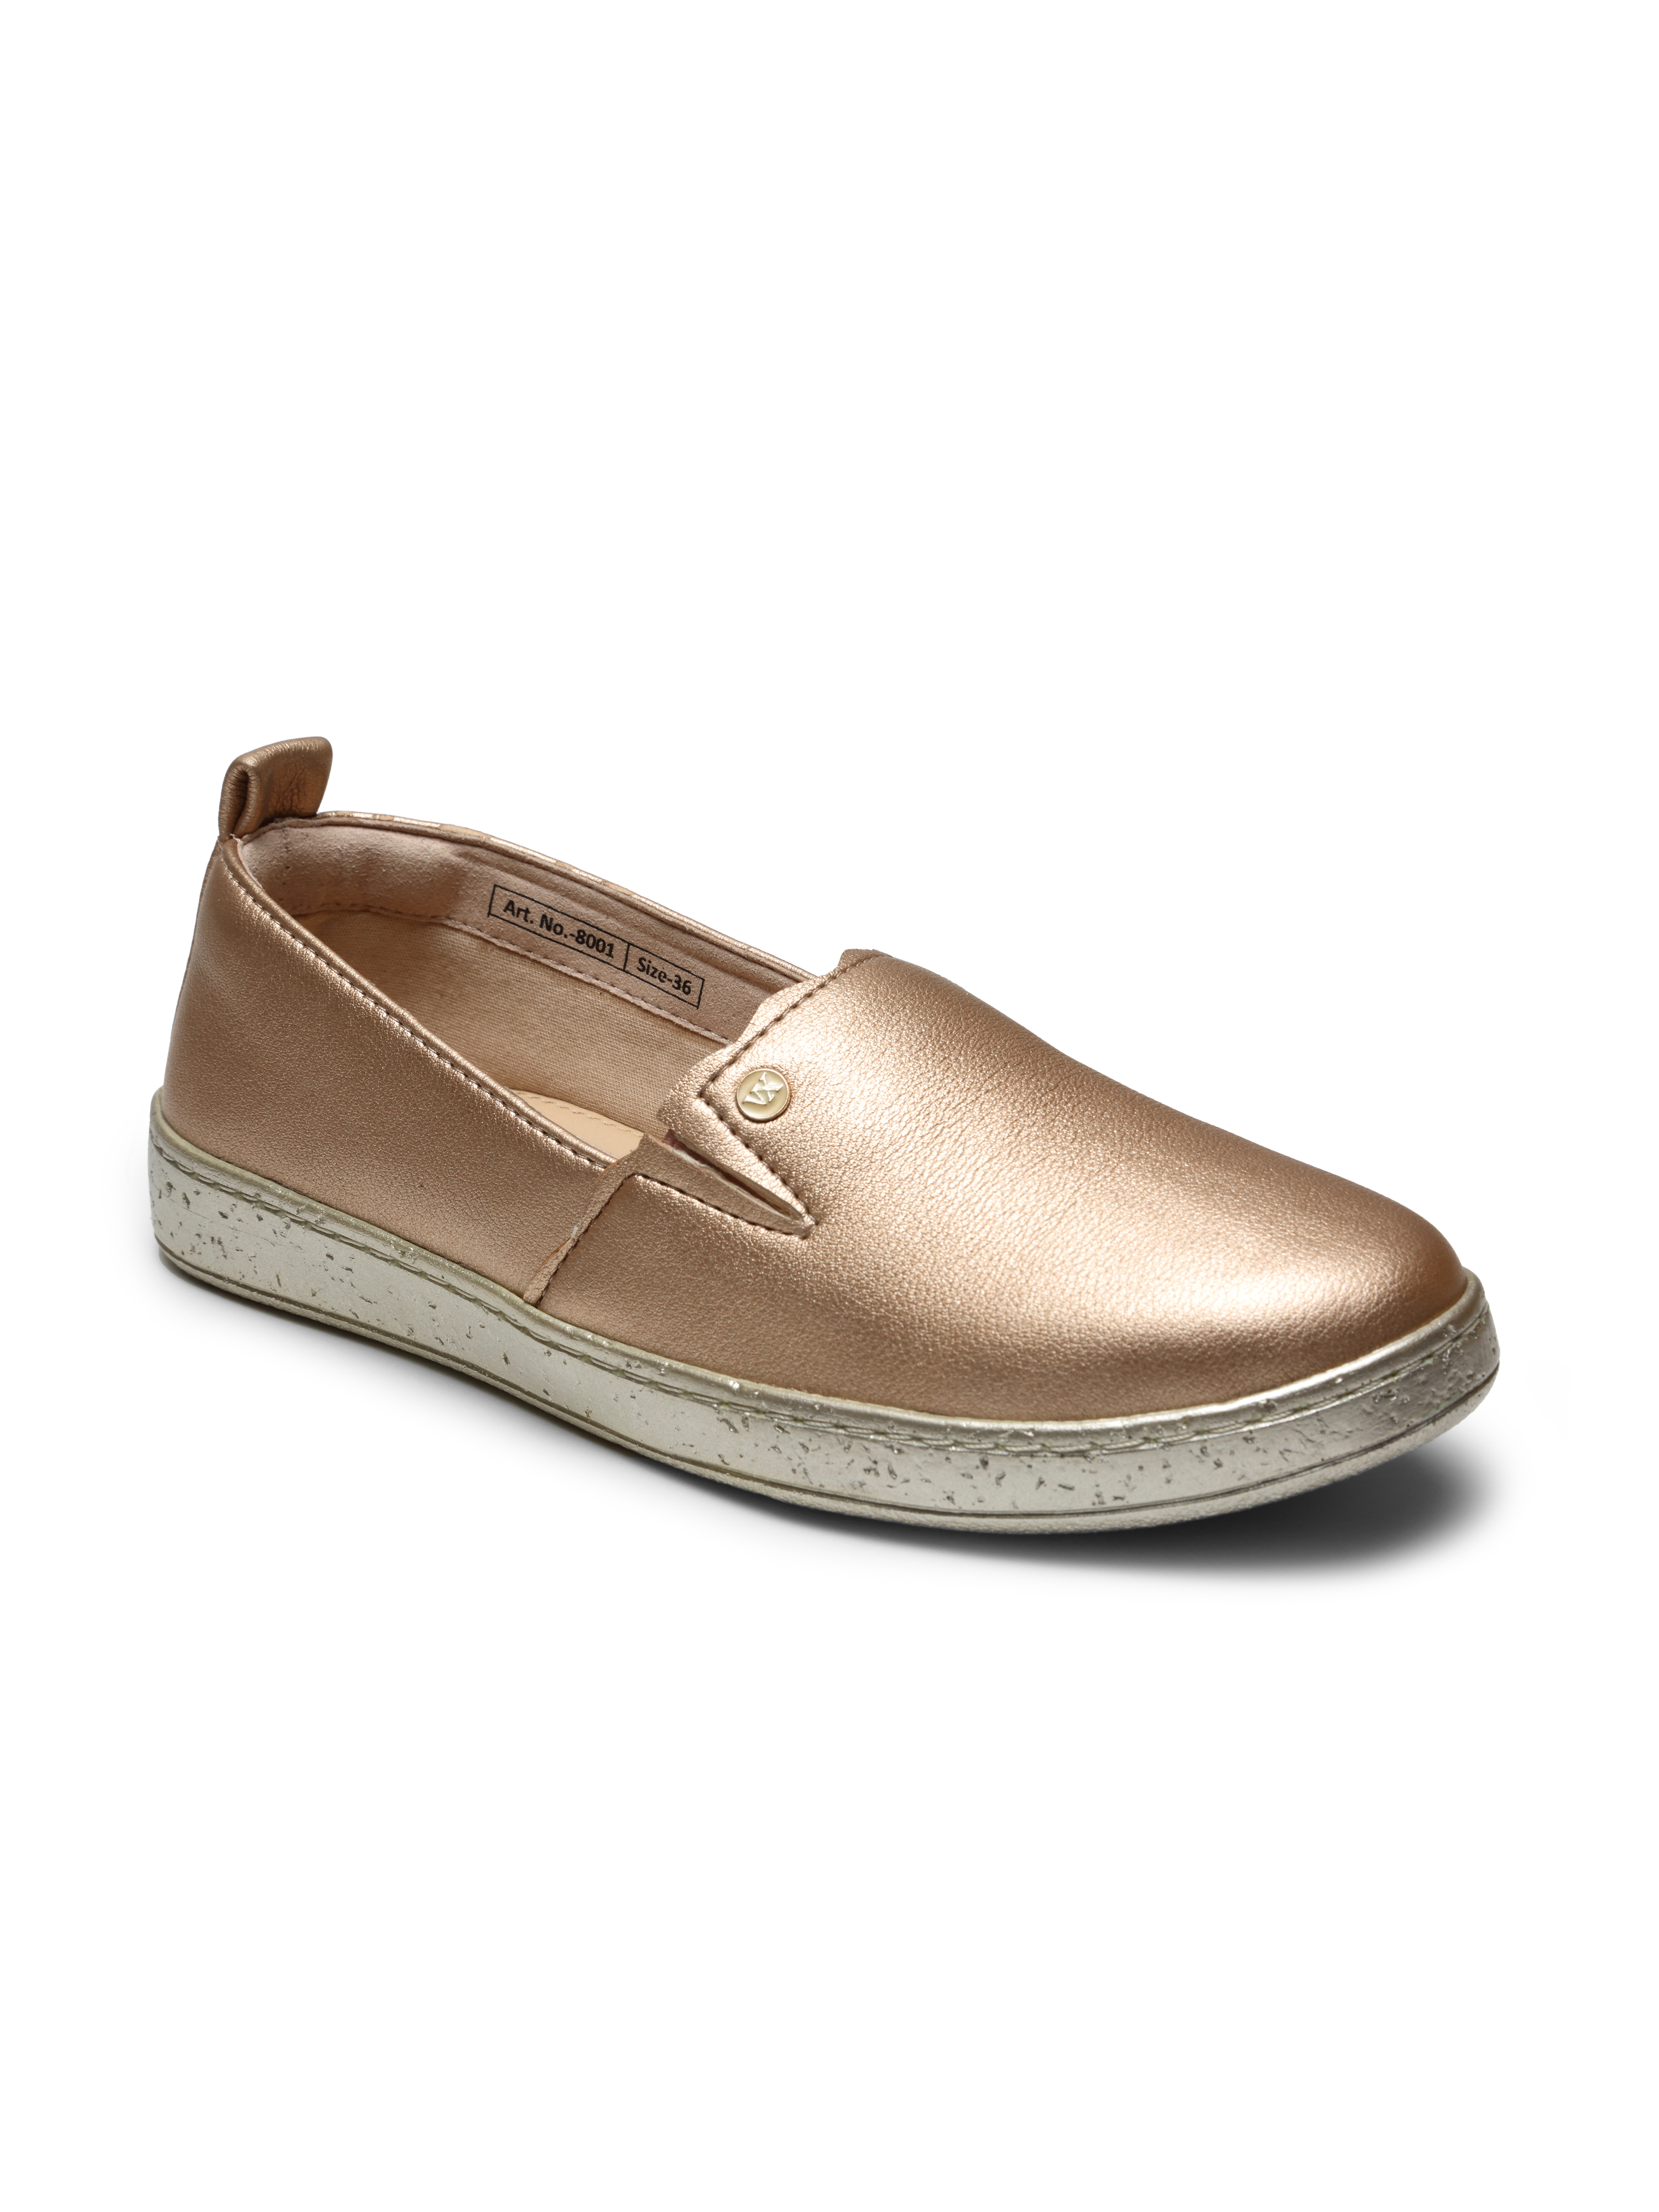 Buy Von Wellx Germany Comfort Women's Peach Casual Shoes Ida Online in Kanpur